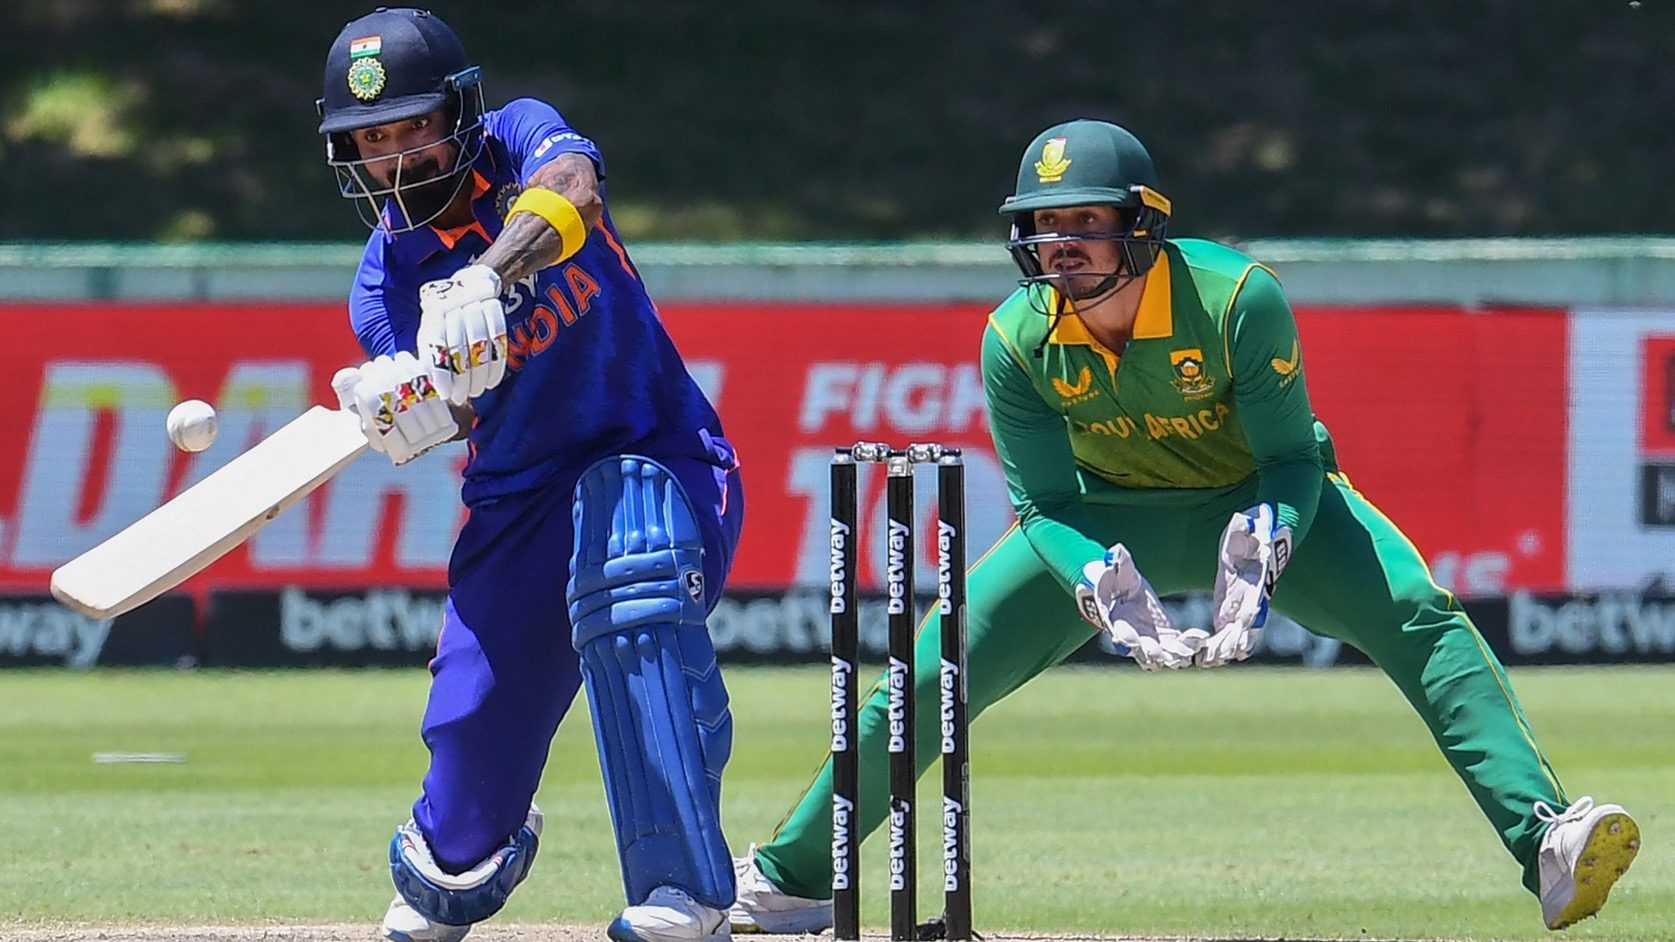 India vs South Africa T20 2022: Know schedule, telecast and watch live streaming in India